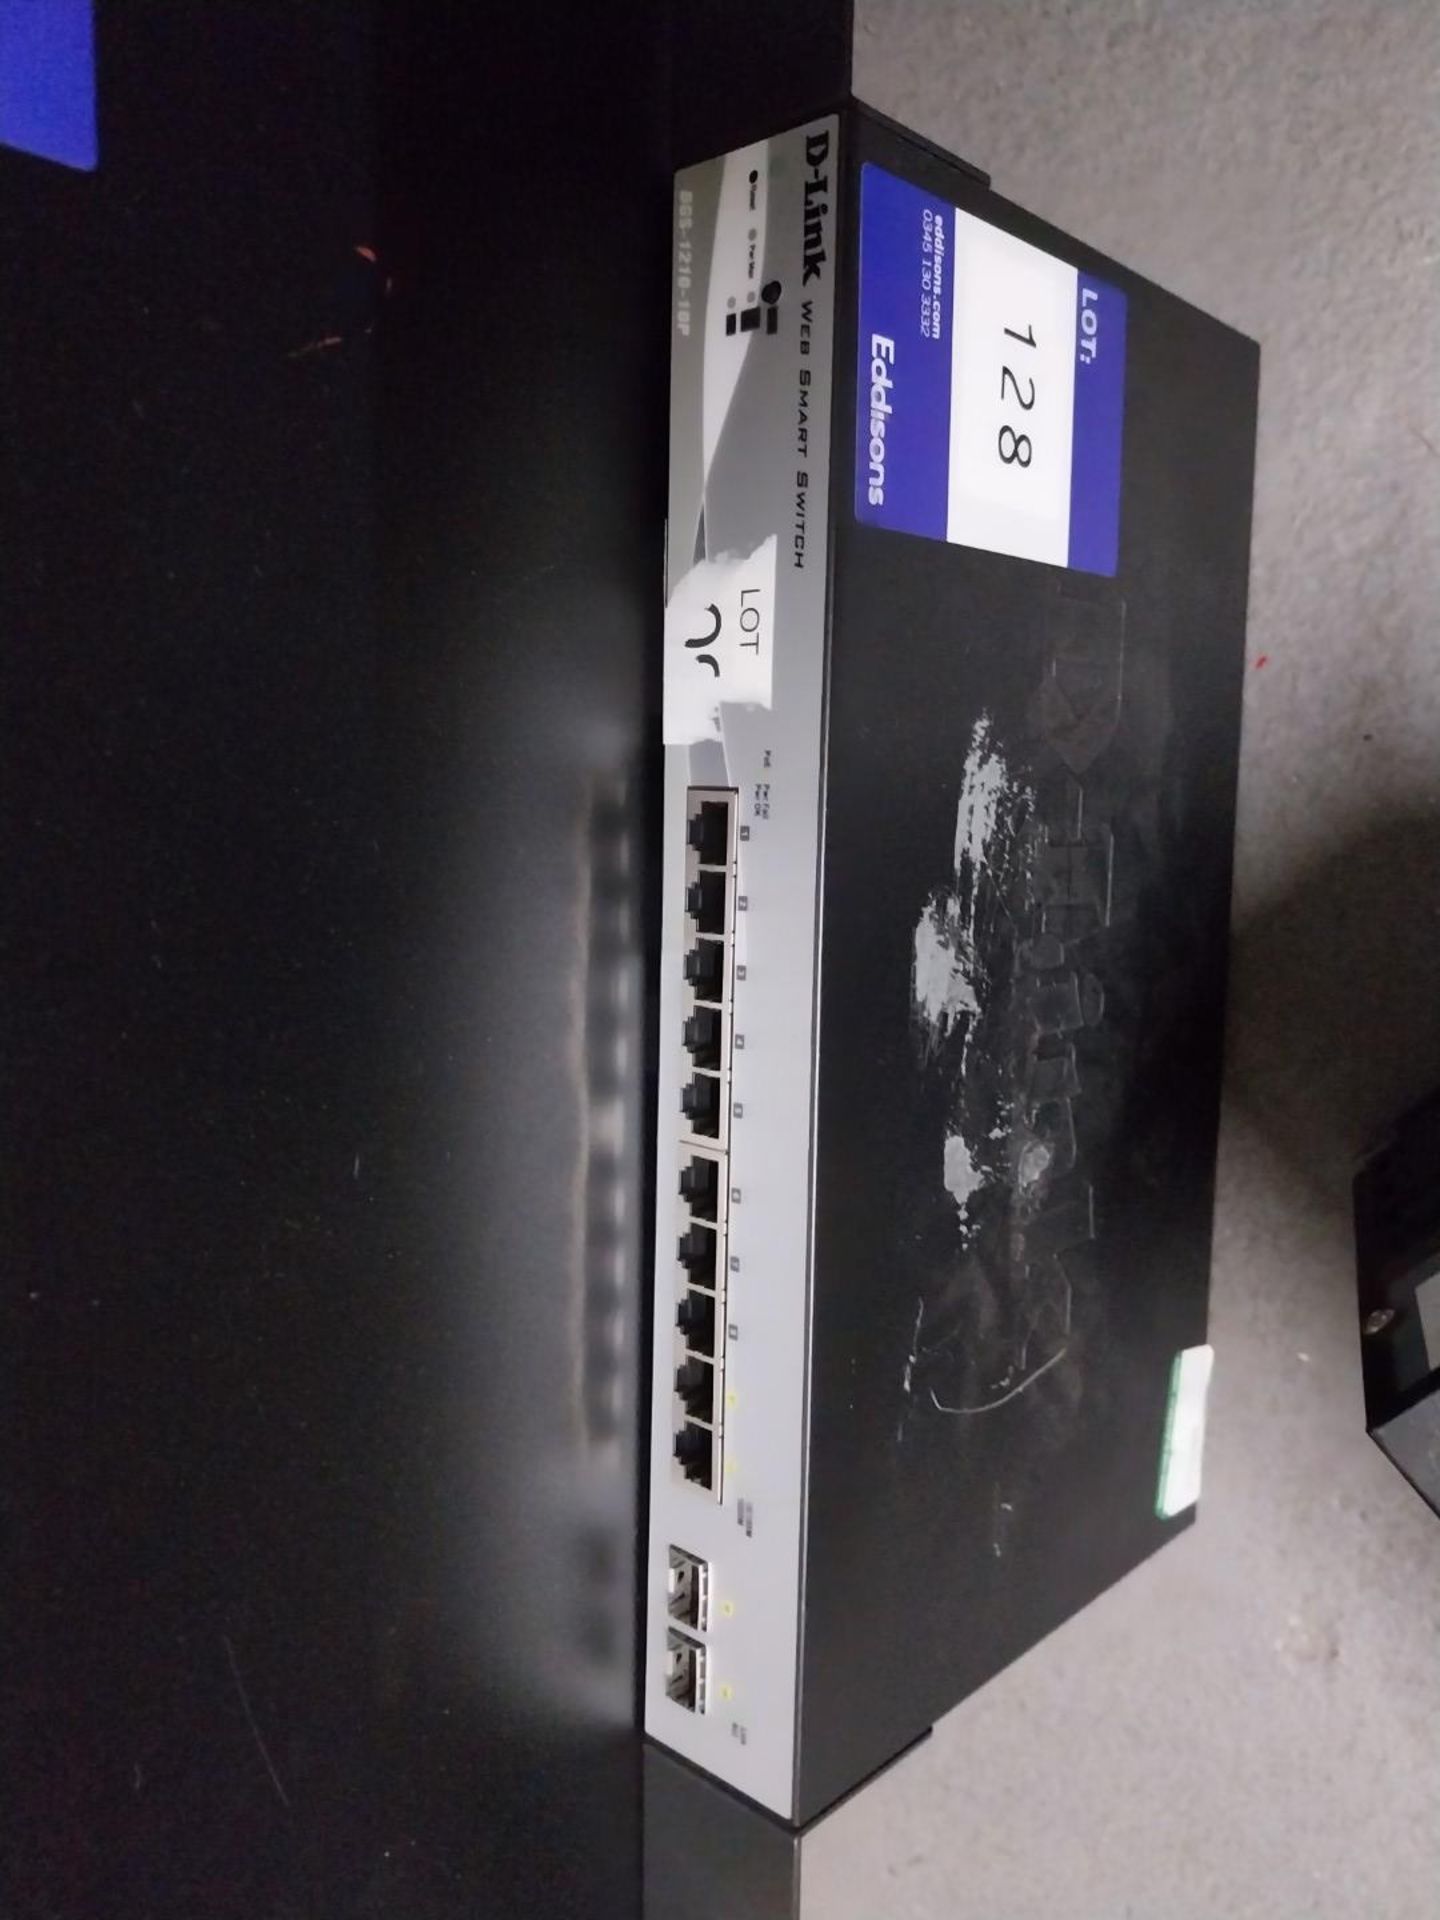 D-Link DGS-1210-10P Web Smart Switch (located in Leeds)